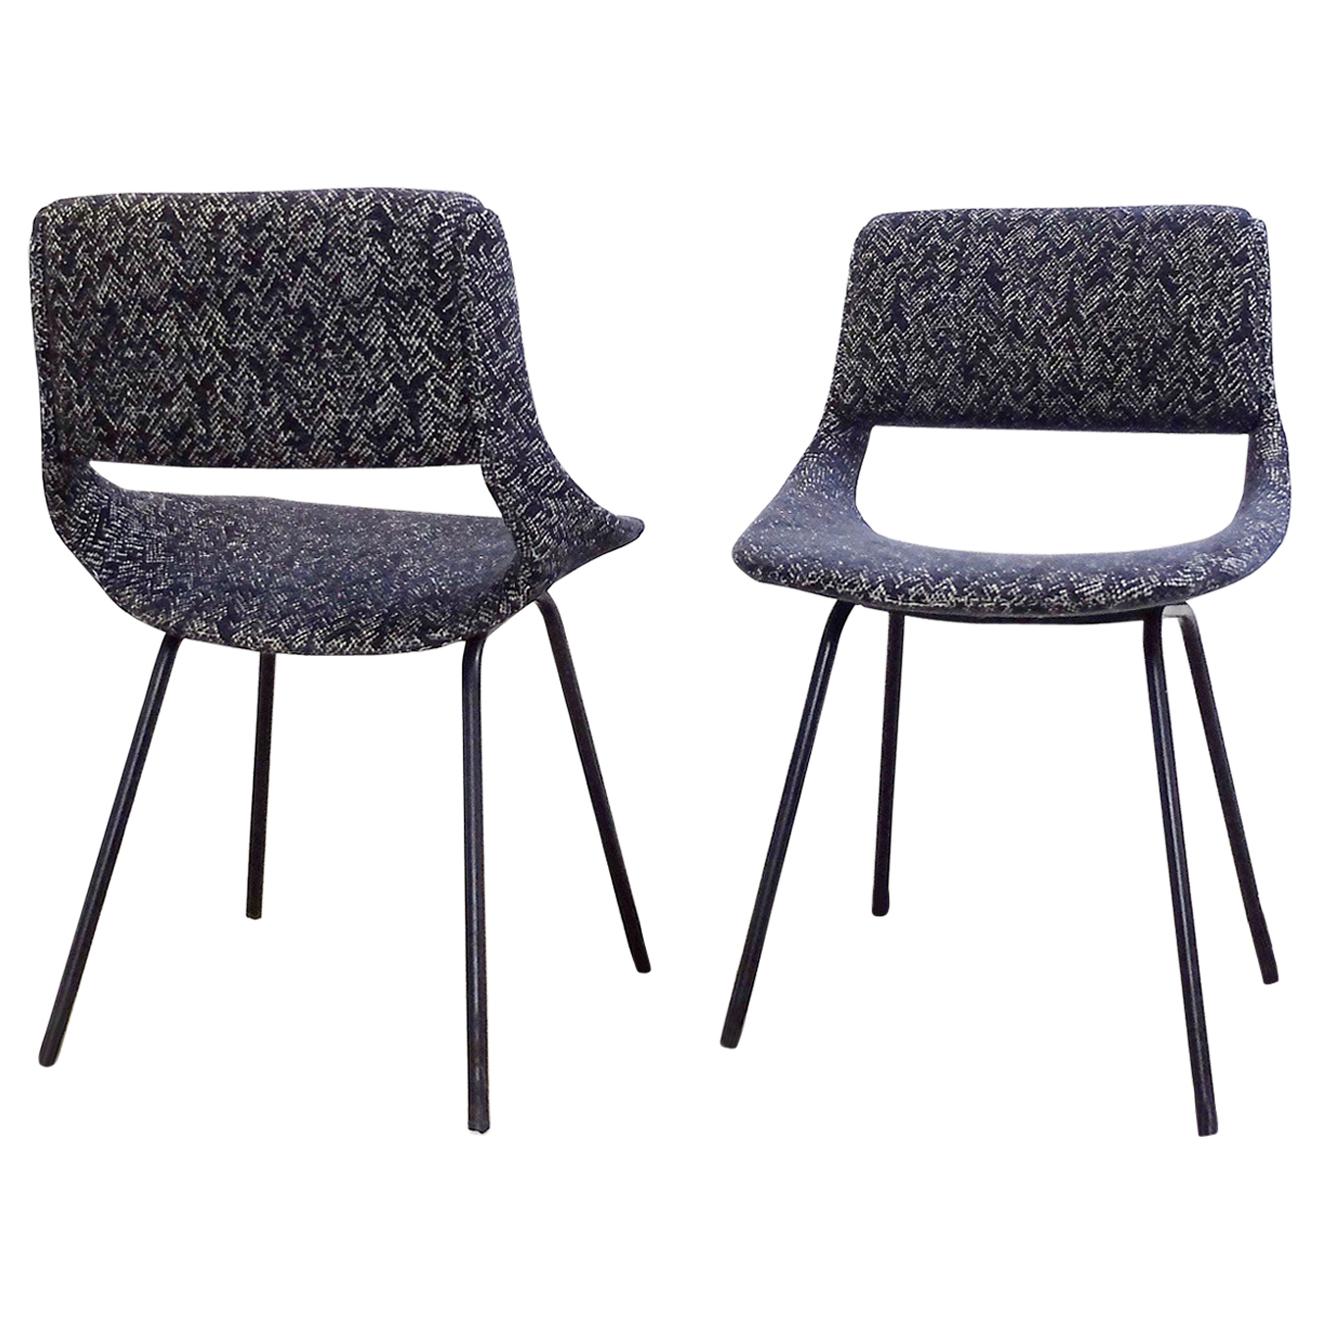 Pair of Chairs by Louis Paolozzi For Zol, New Upholstered